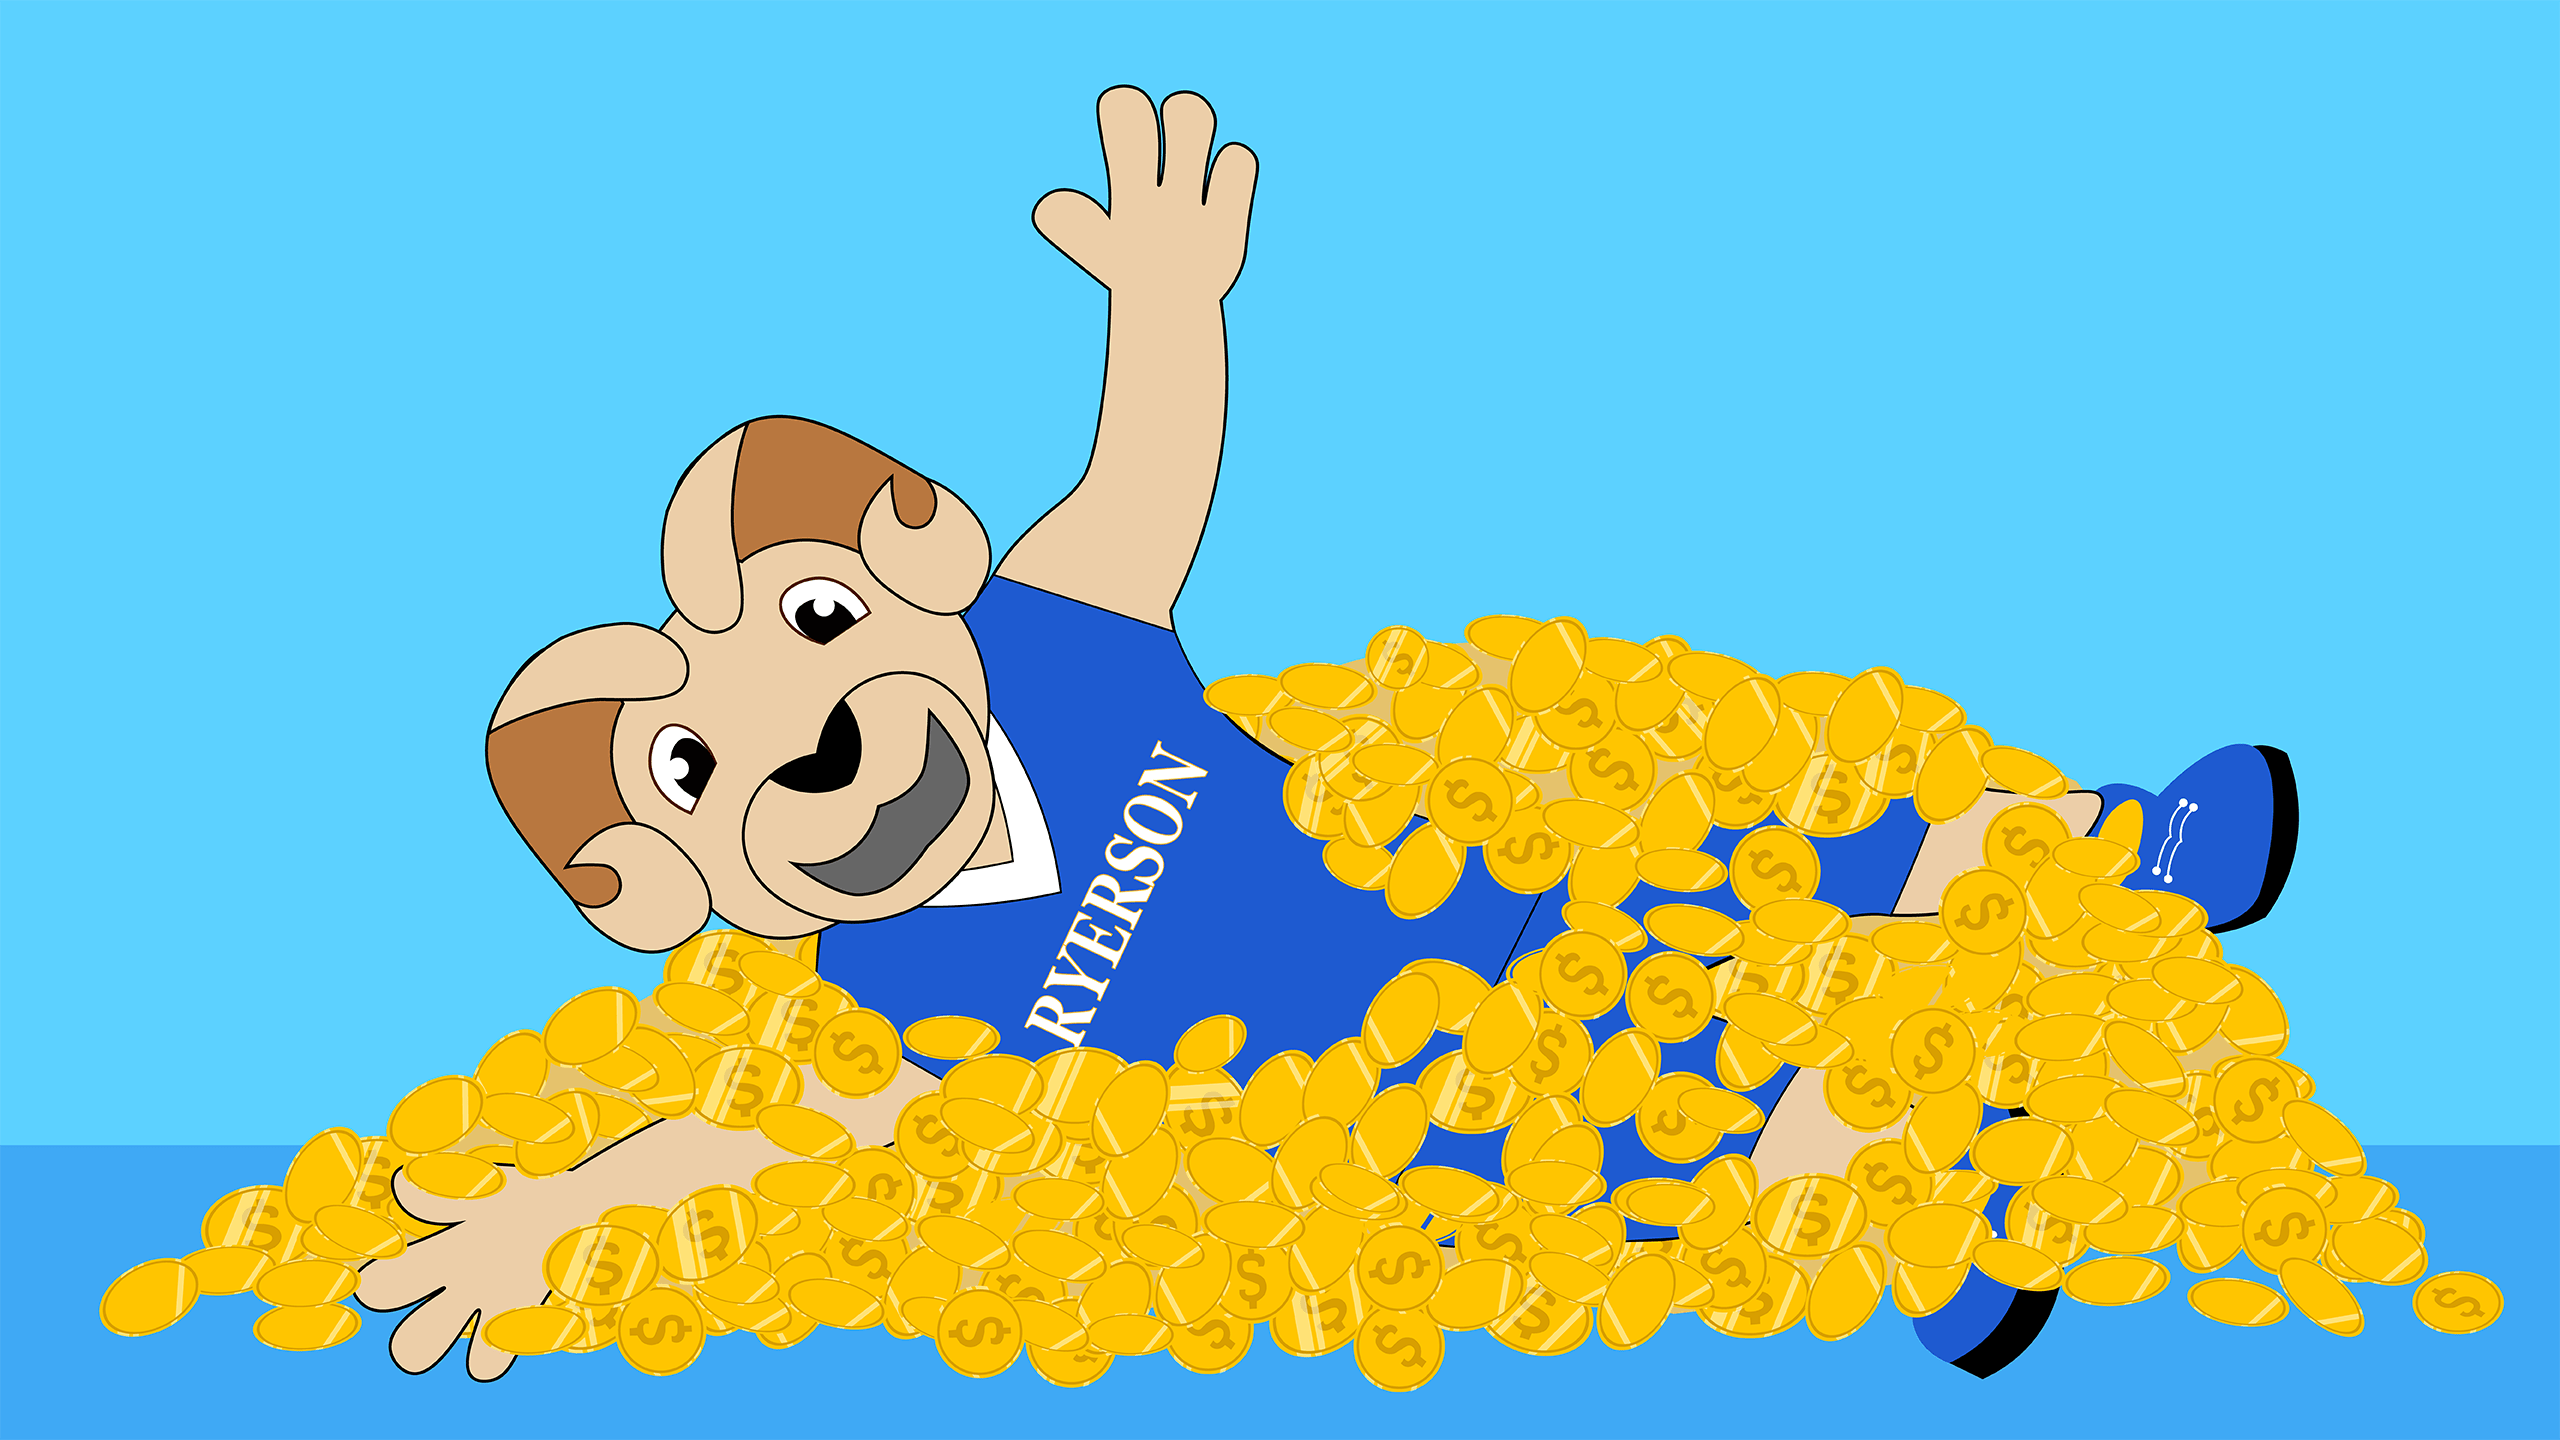 Eggy the Ram lying in a pile of coins